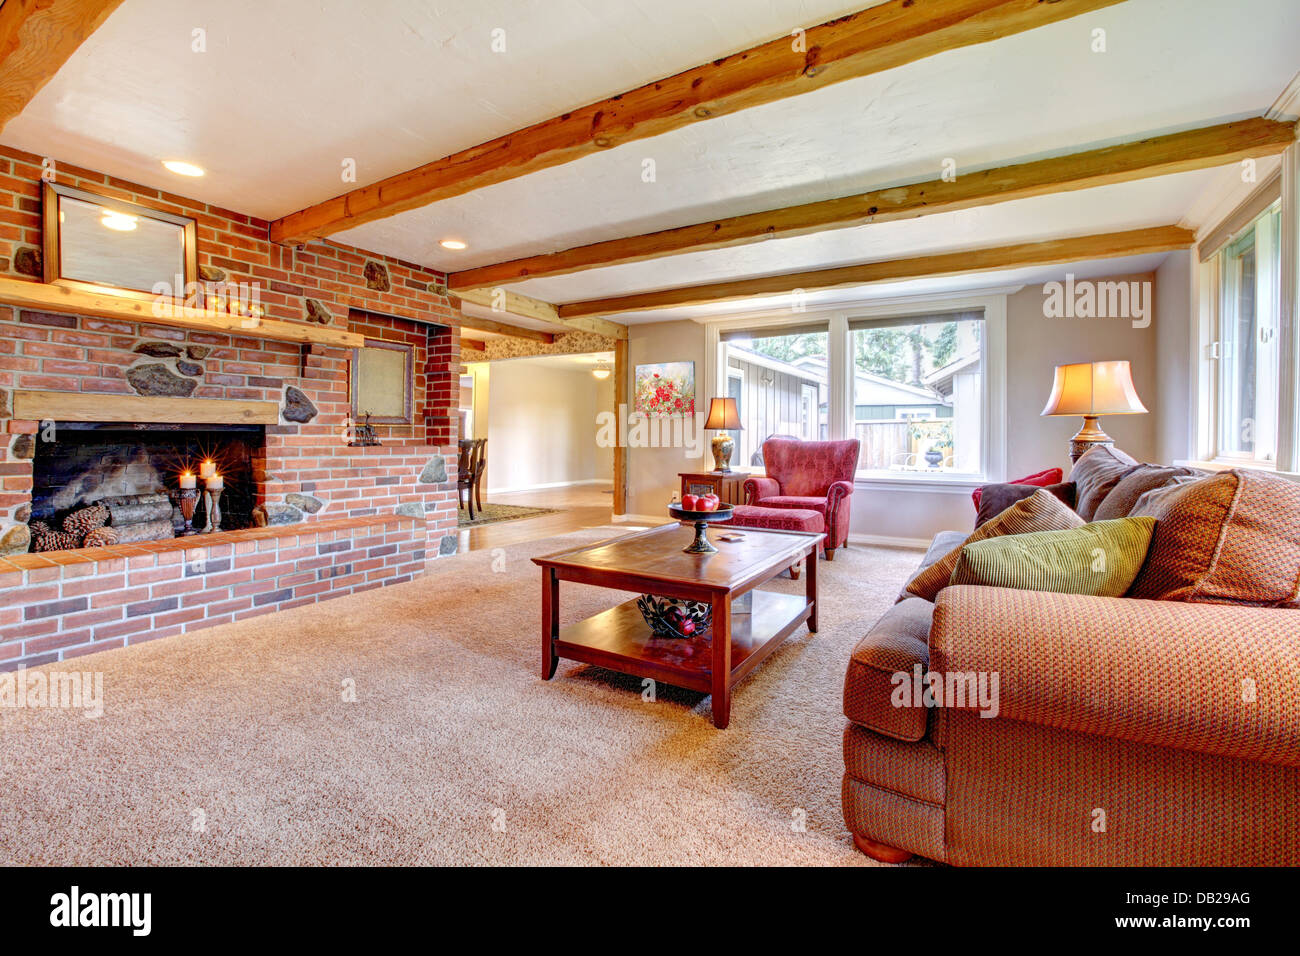 Living room interior with brick fireplace, wood beams and red. Stock Photo